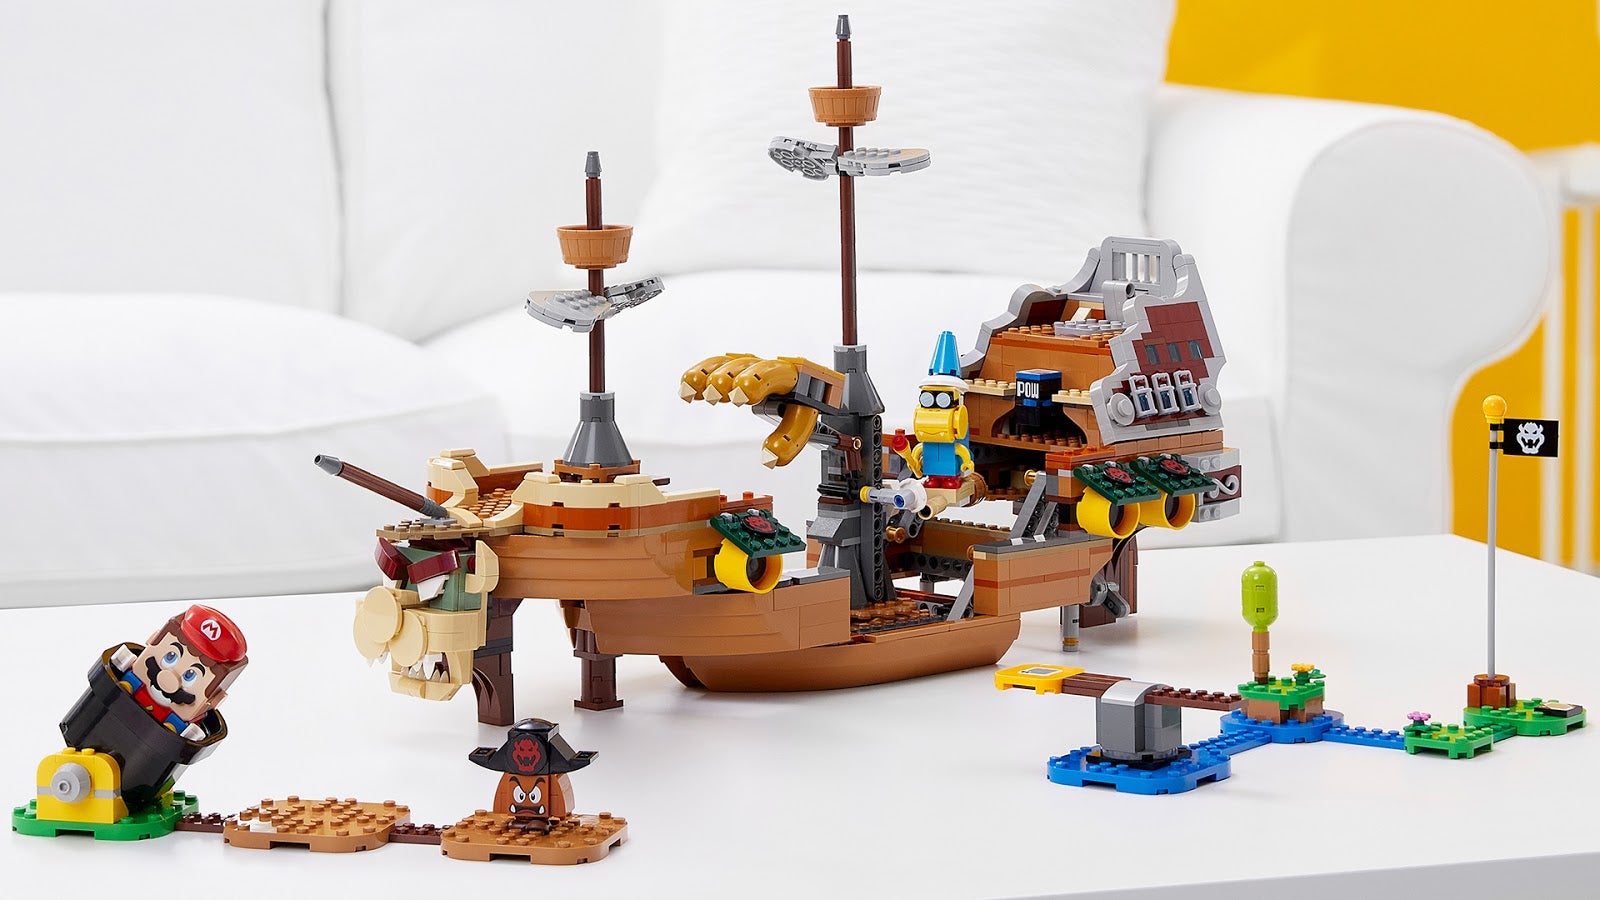 His majesty's secret airship.  (Photo: The Lego Group)